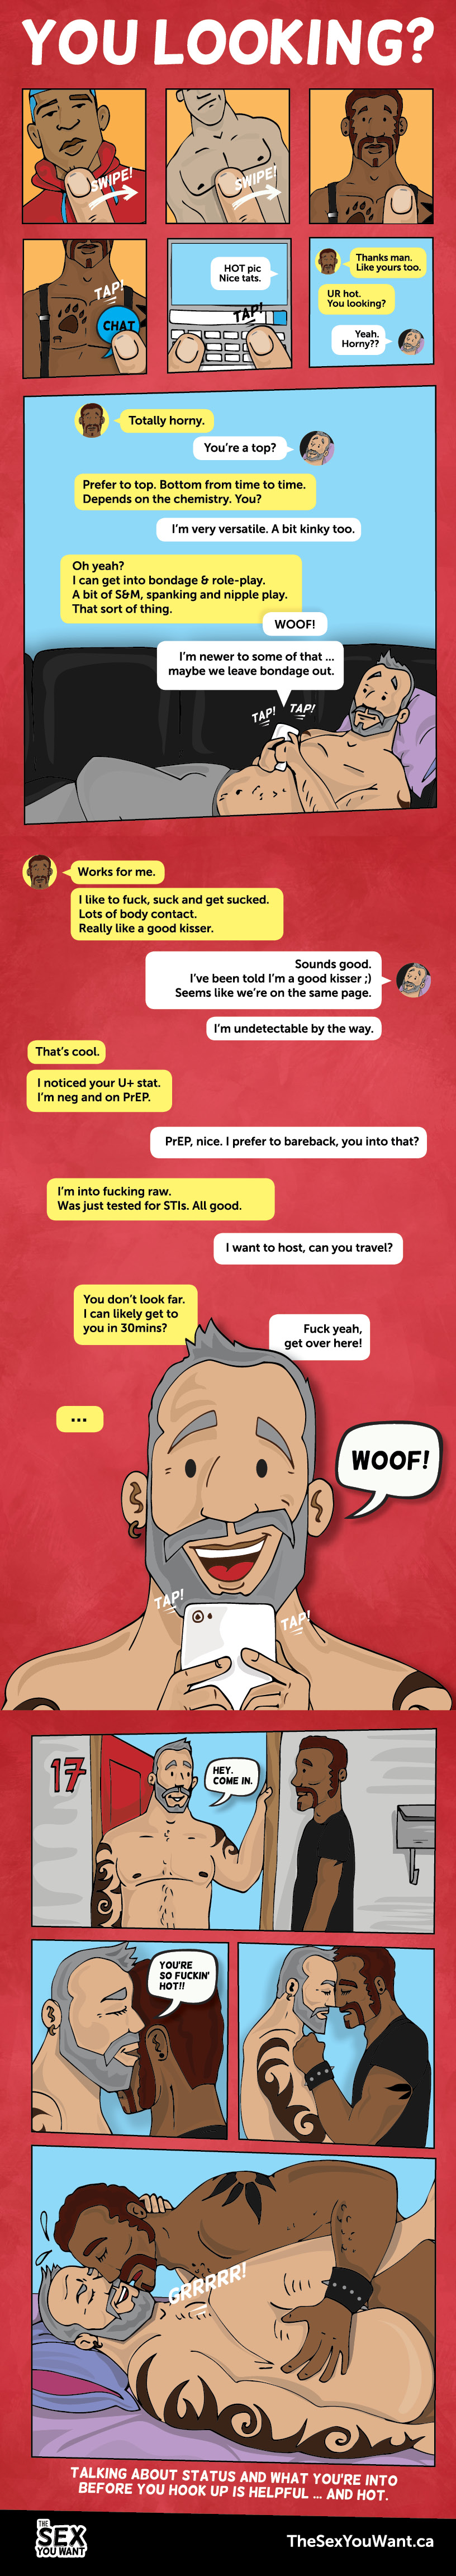 Comic that shows two guys having a pre-hook up online chat.